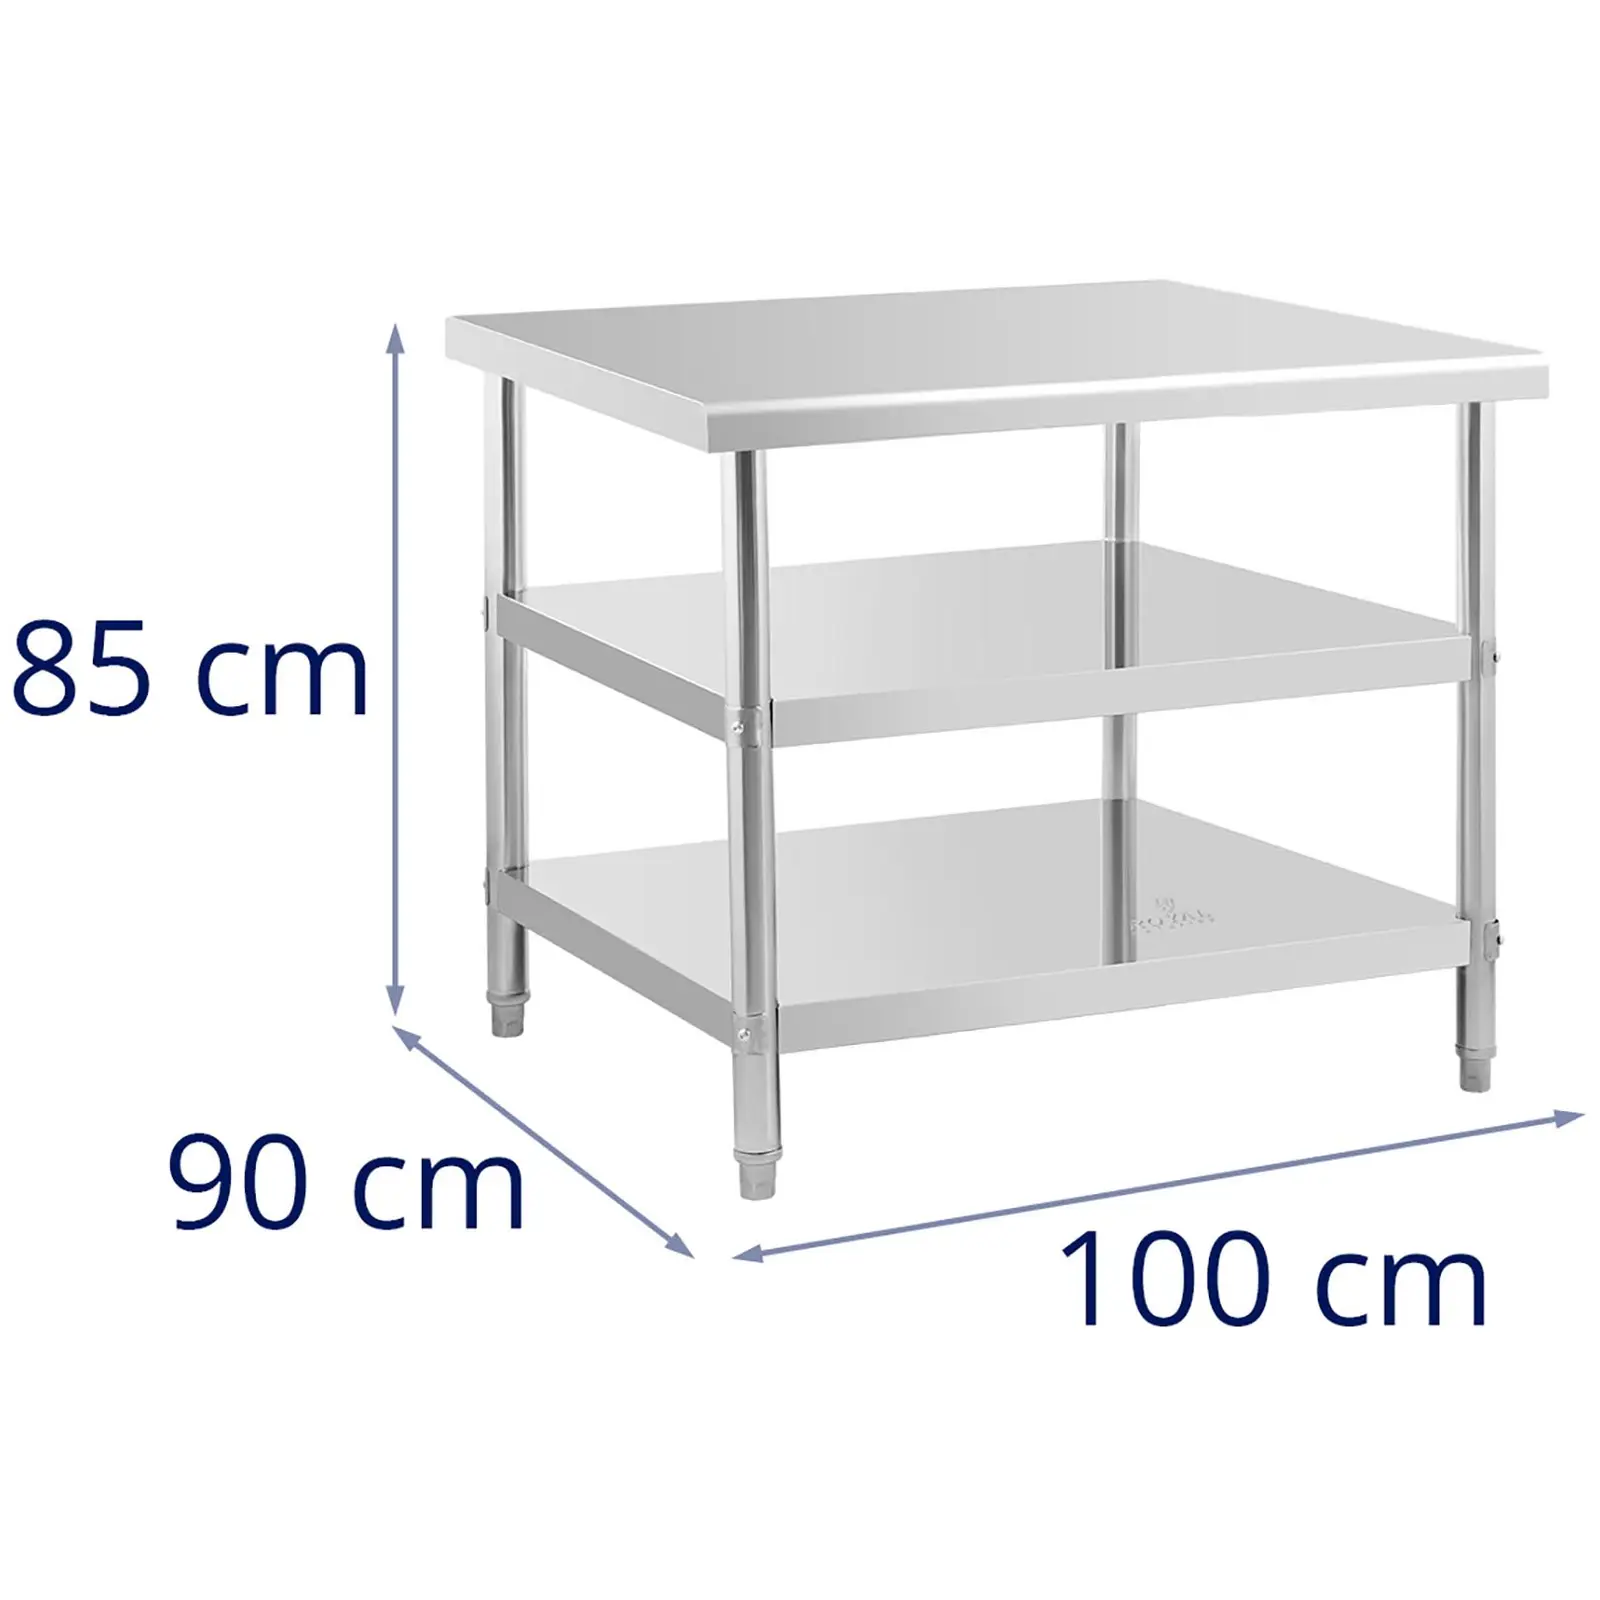 Stainless steel table - 100 x 90 x 5 cm - 195 kg - 2 shelves - Royal Catering